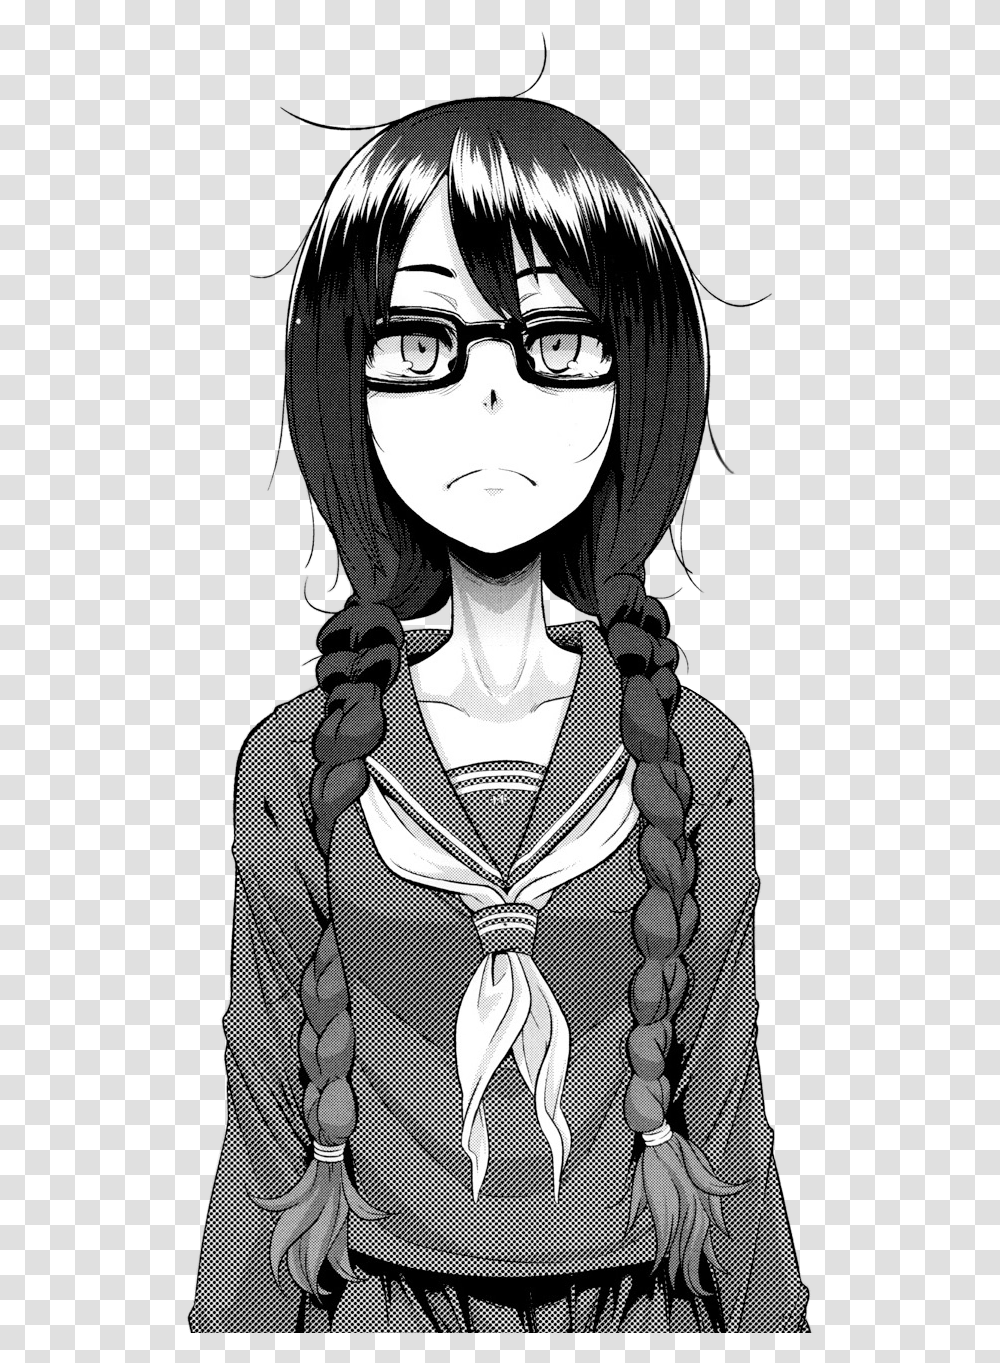 Download Free Tsuyu Is The Girl From Emergence Anime Metamorphosis Manga Meme, Clothing, Tie, Person, Glasses Transparent Png